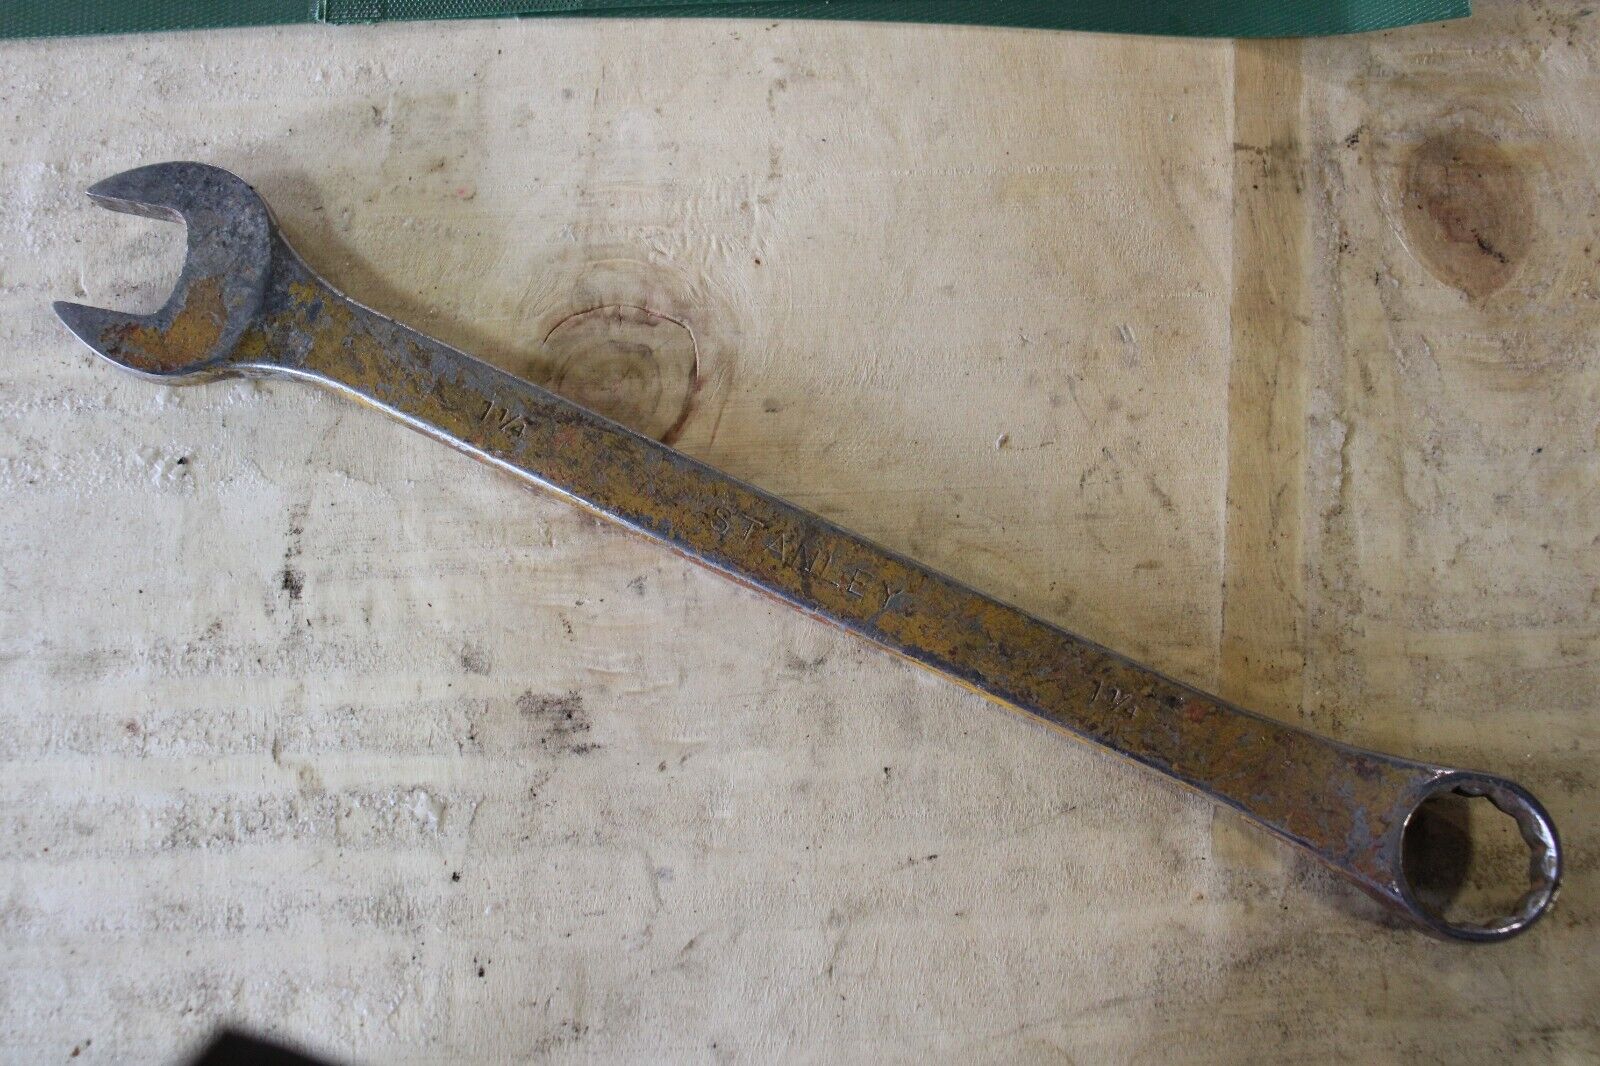 1 1/4 INCH COMBINATION WRENCH STANLEY 86-846 USA